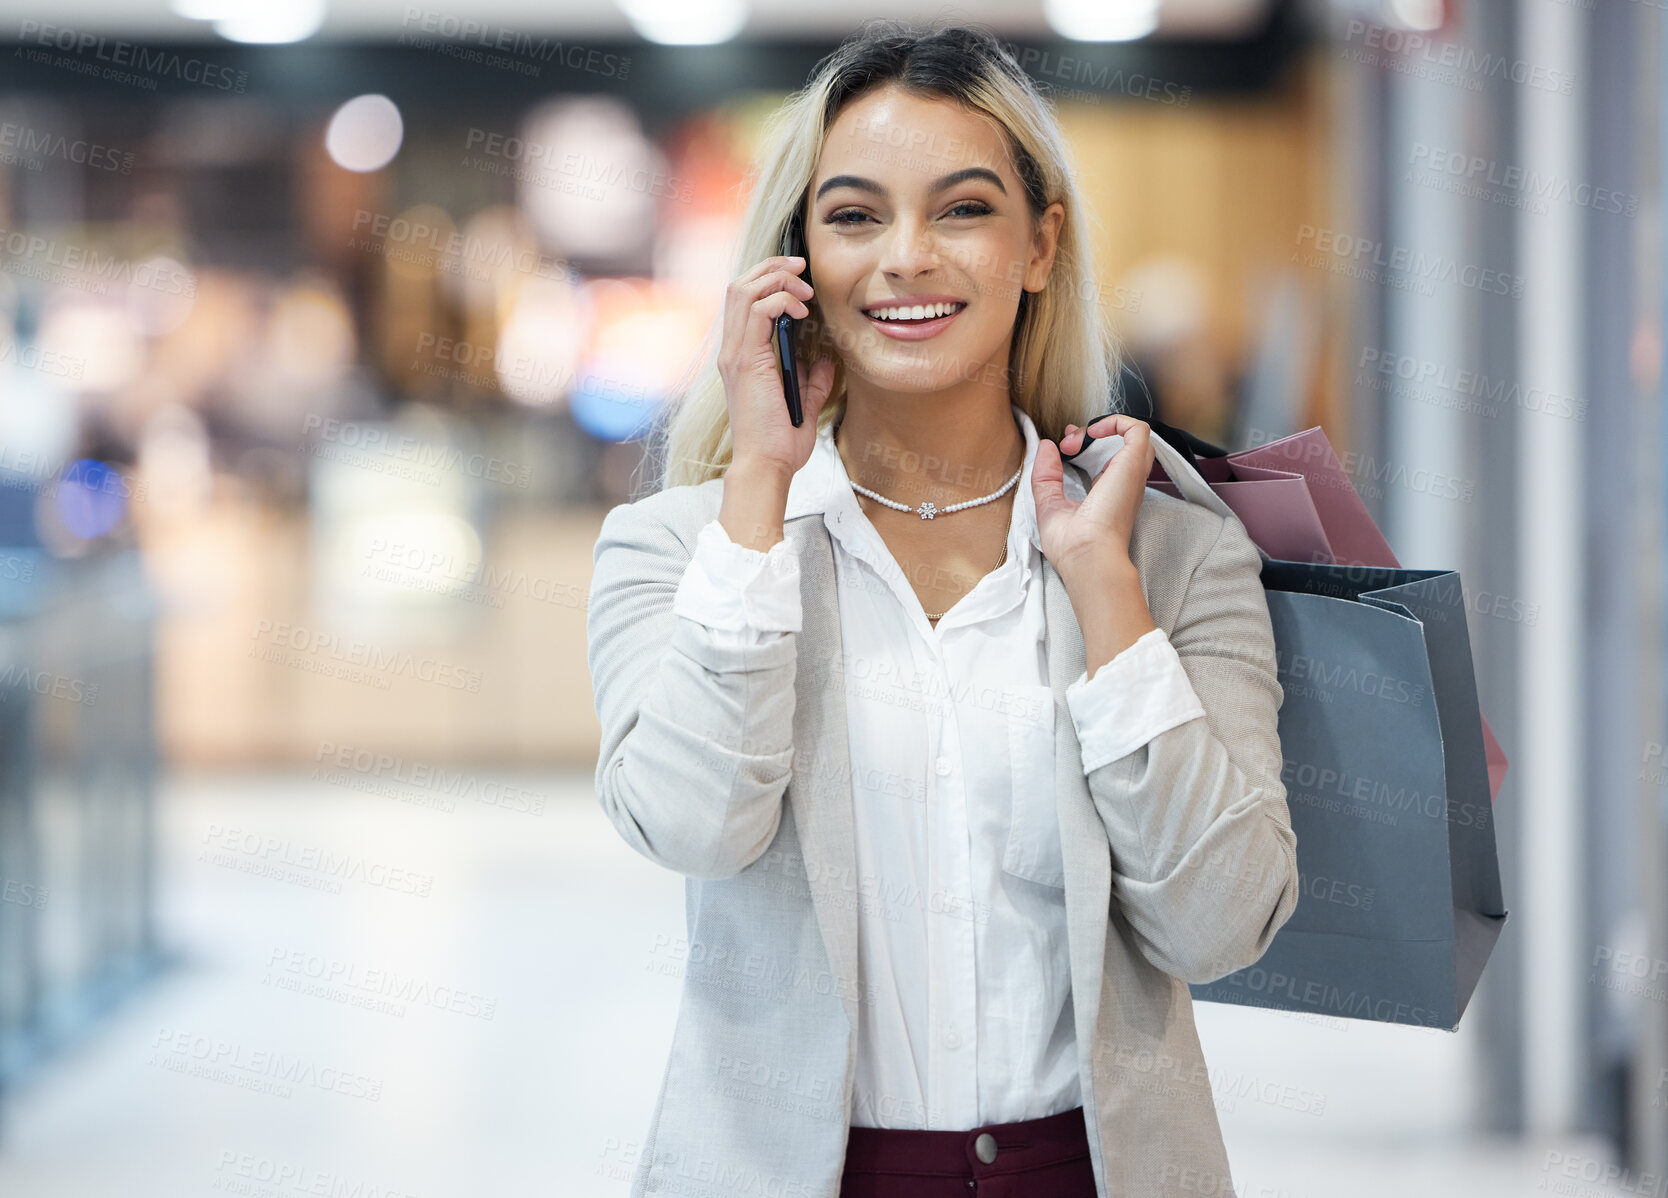 Buy stock photo Shot of a young woman using her smartphone to make a call while shopping